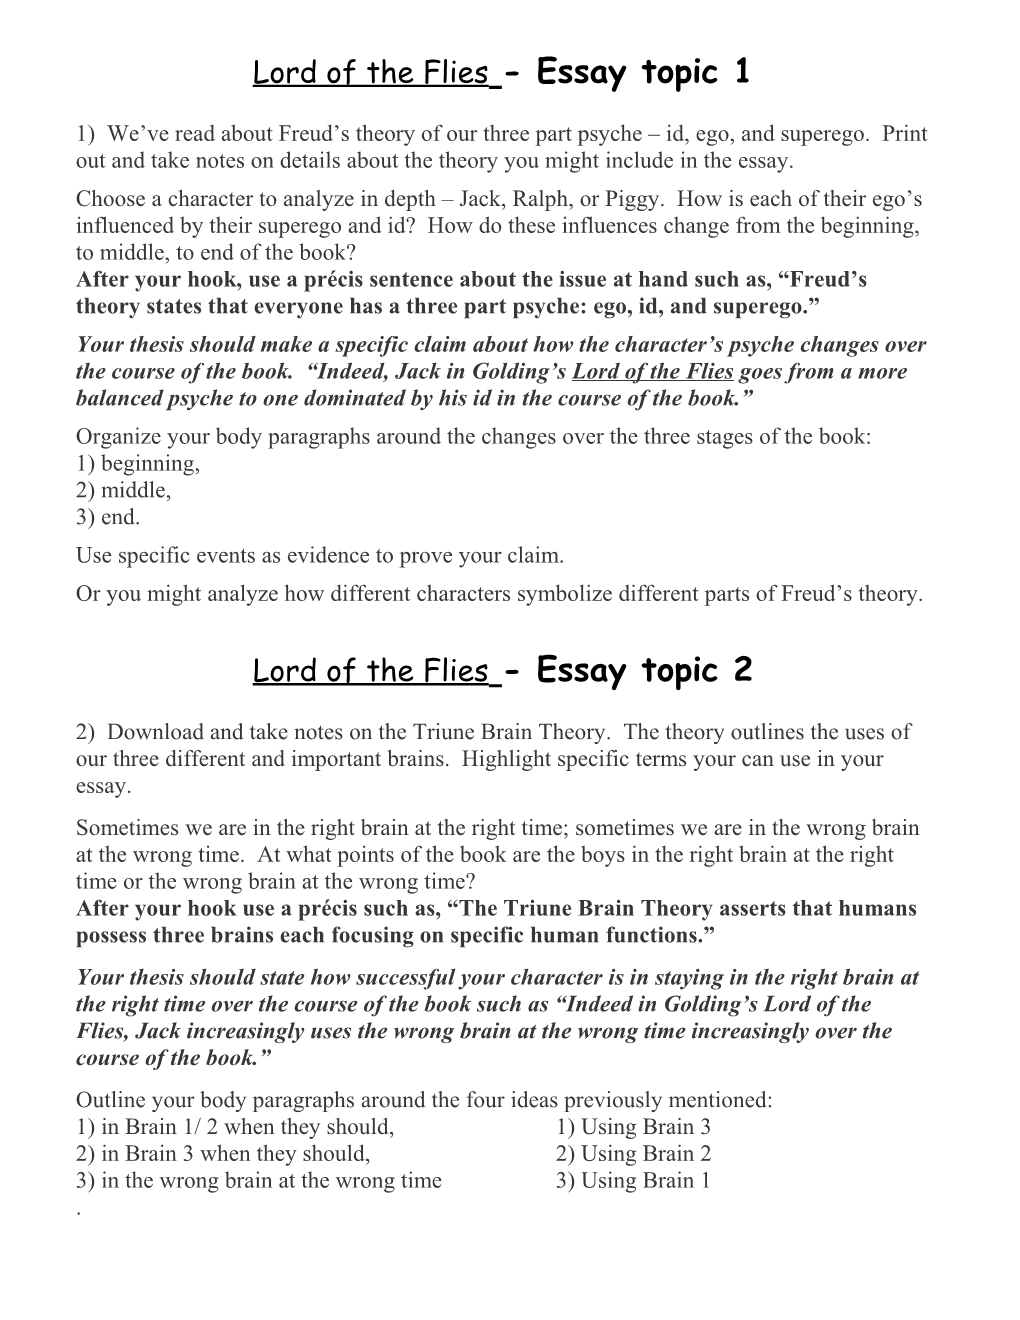 Lord of the Flies - Essay Topics